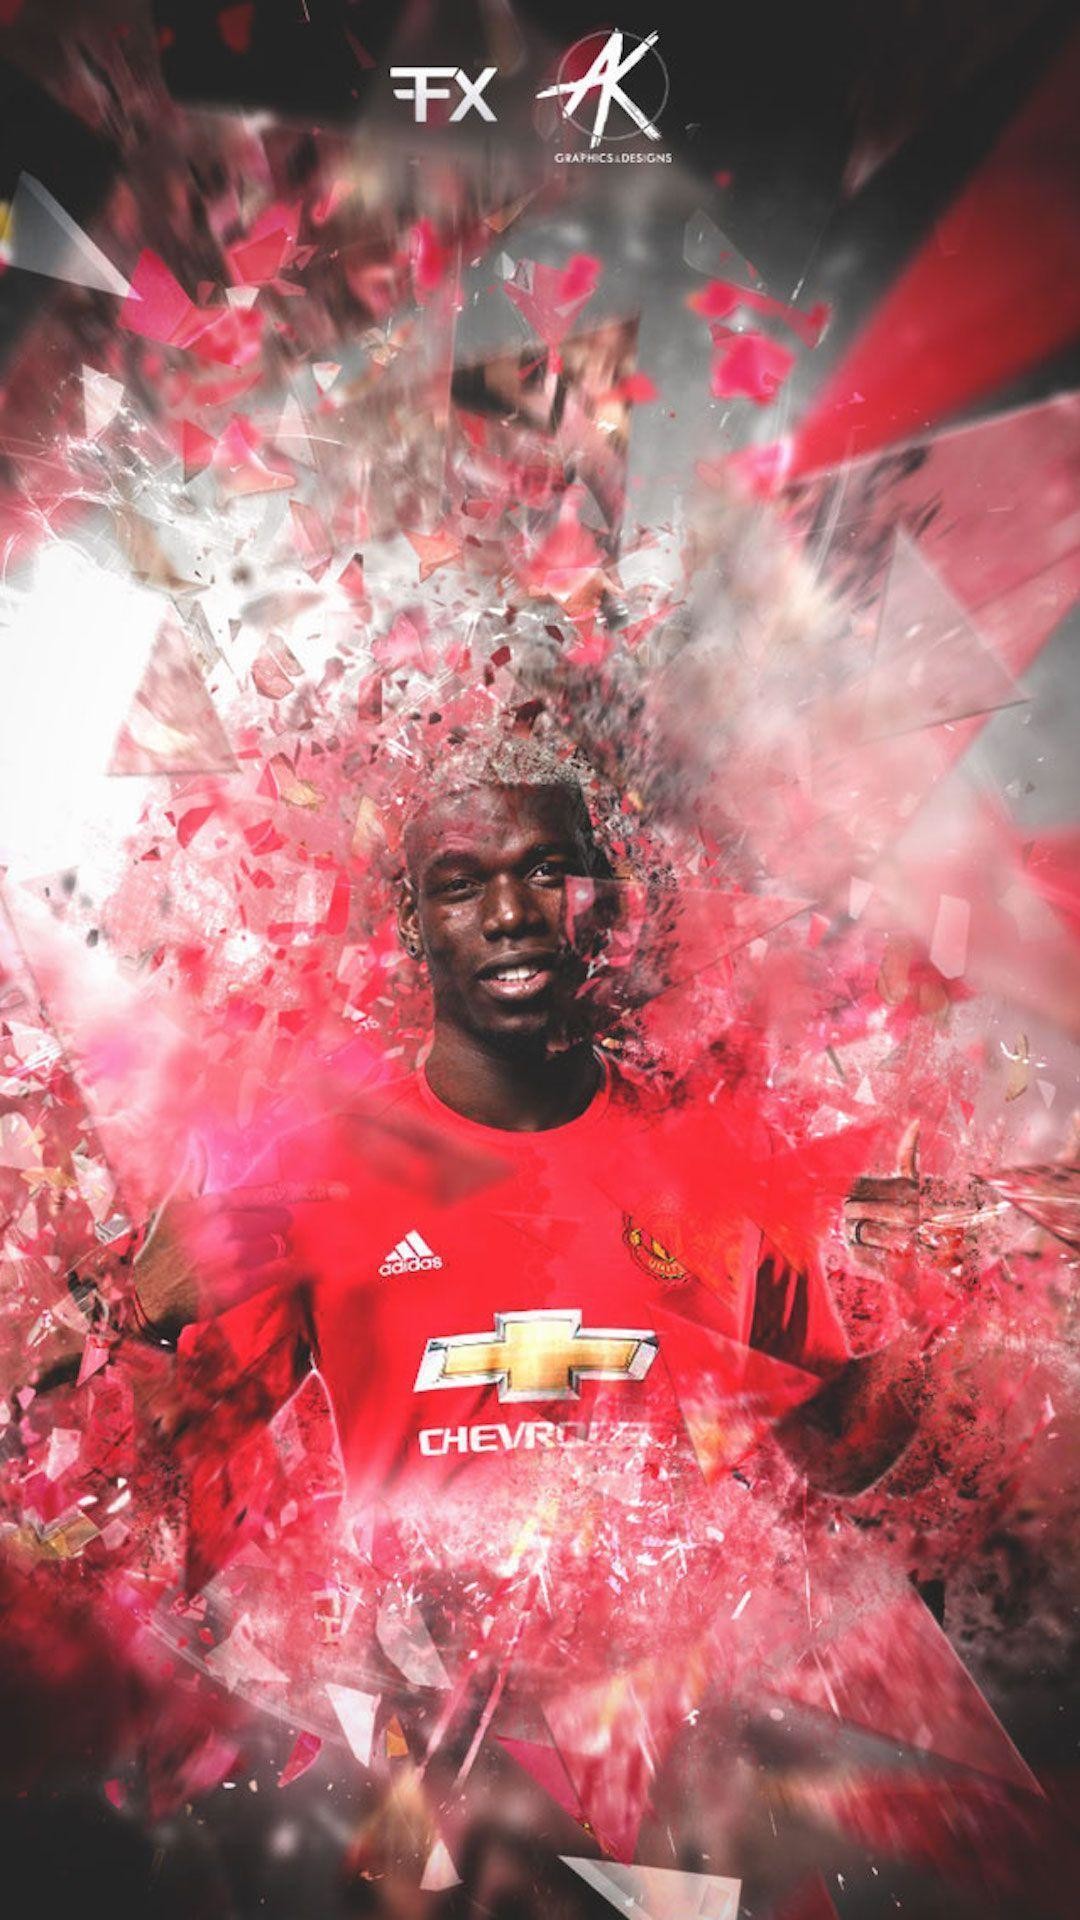 Manchester United iPhone Wallpaper (66+ images)